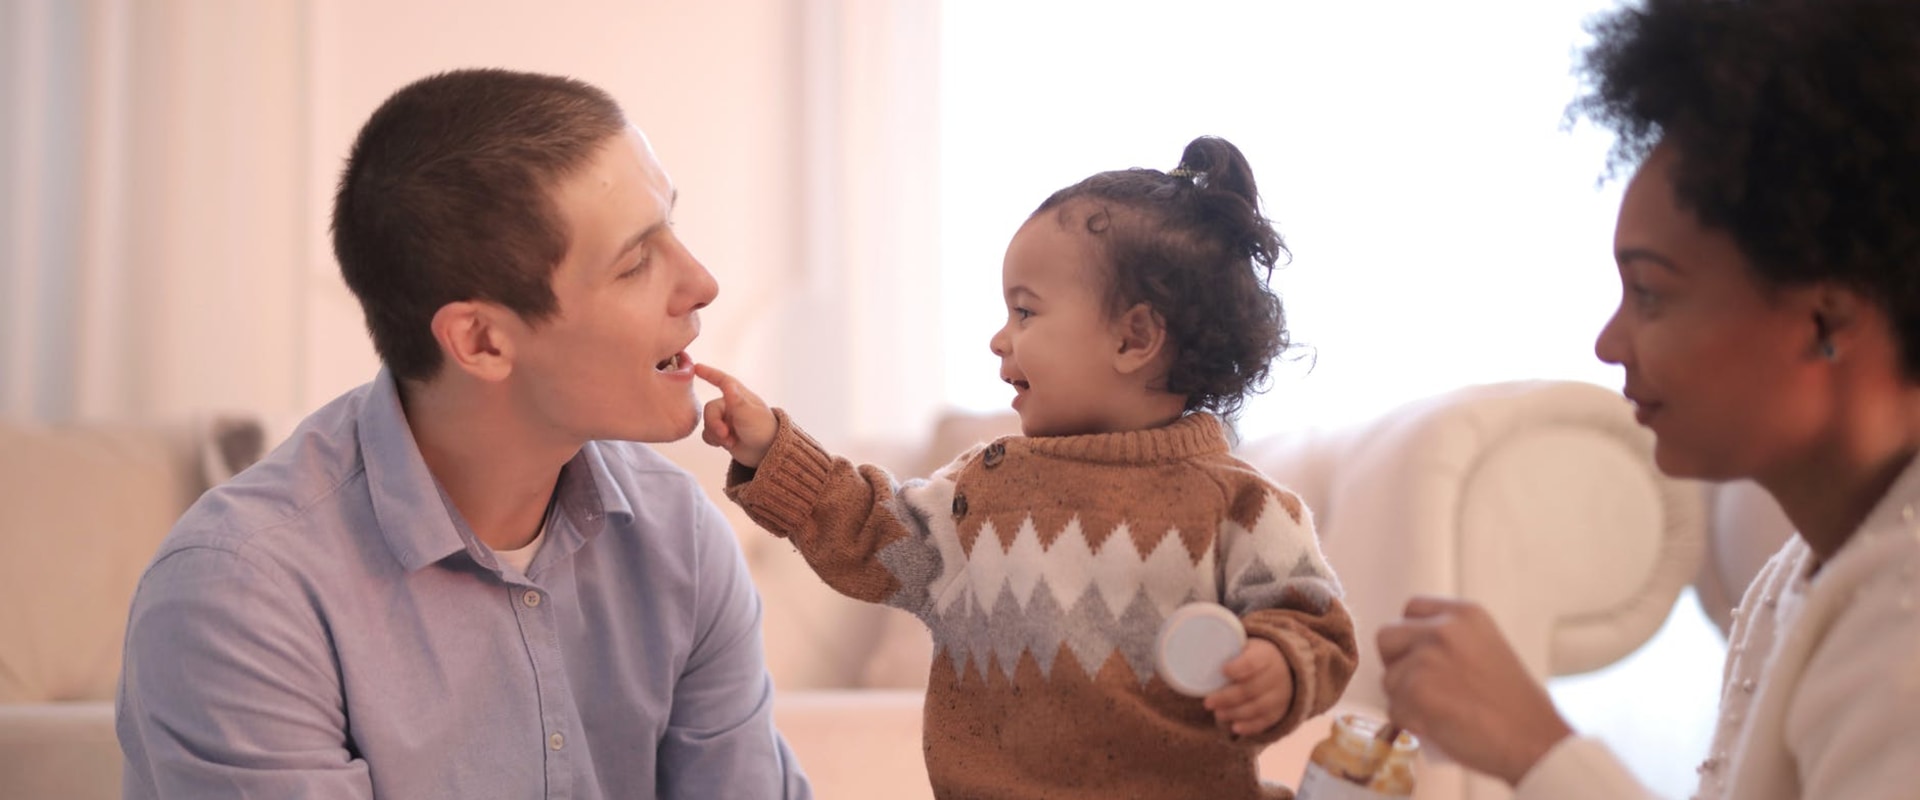 How can parents help with speech therapy?